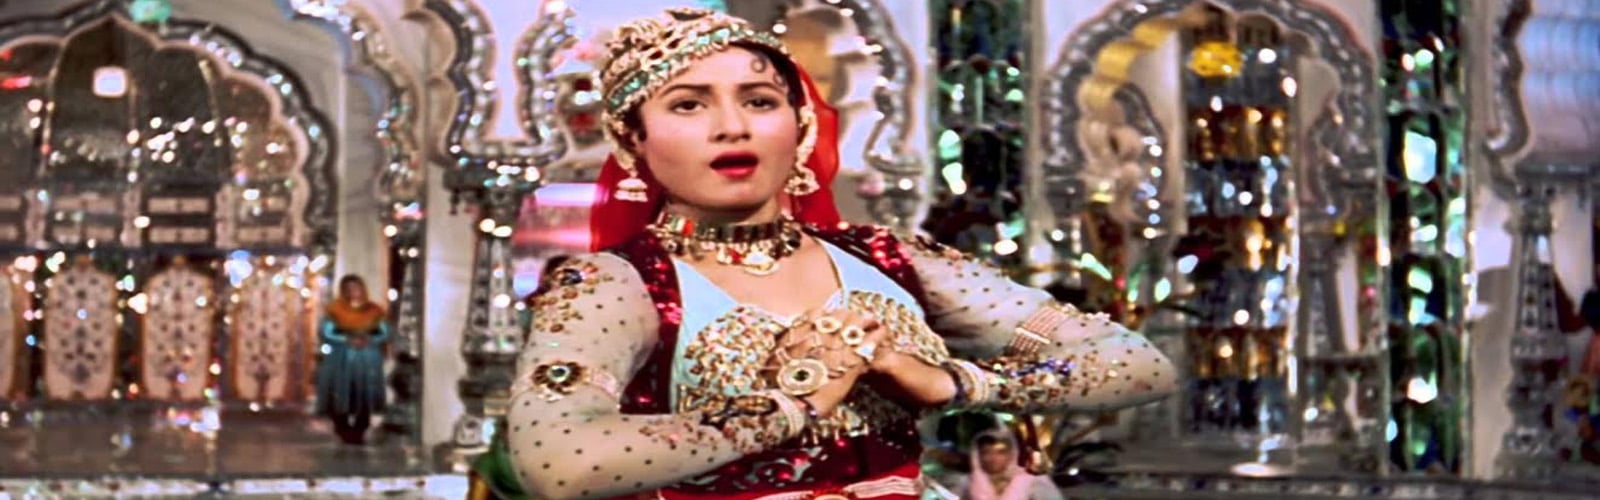 60 years on, Mughal-E-Azam continues to power on